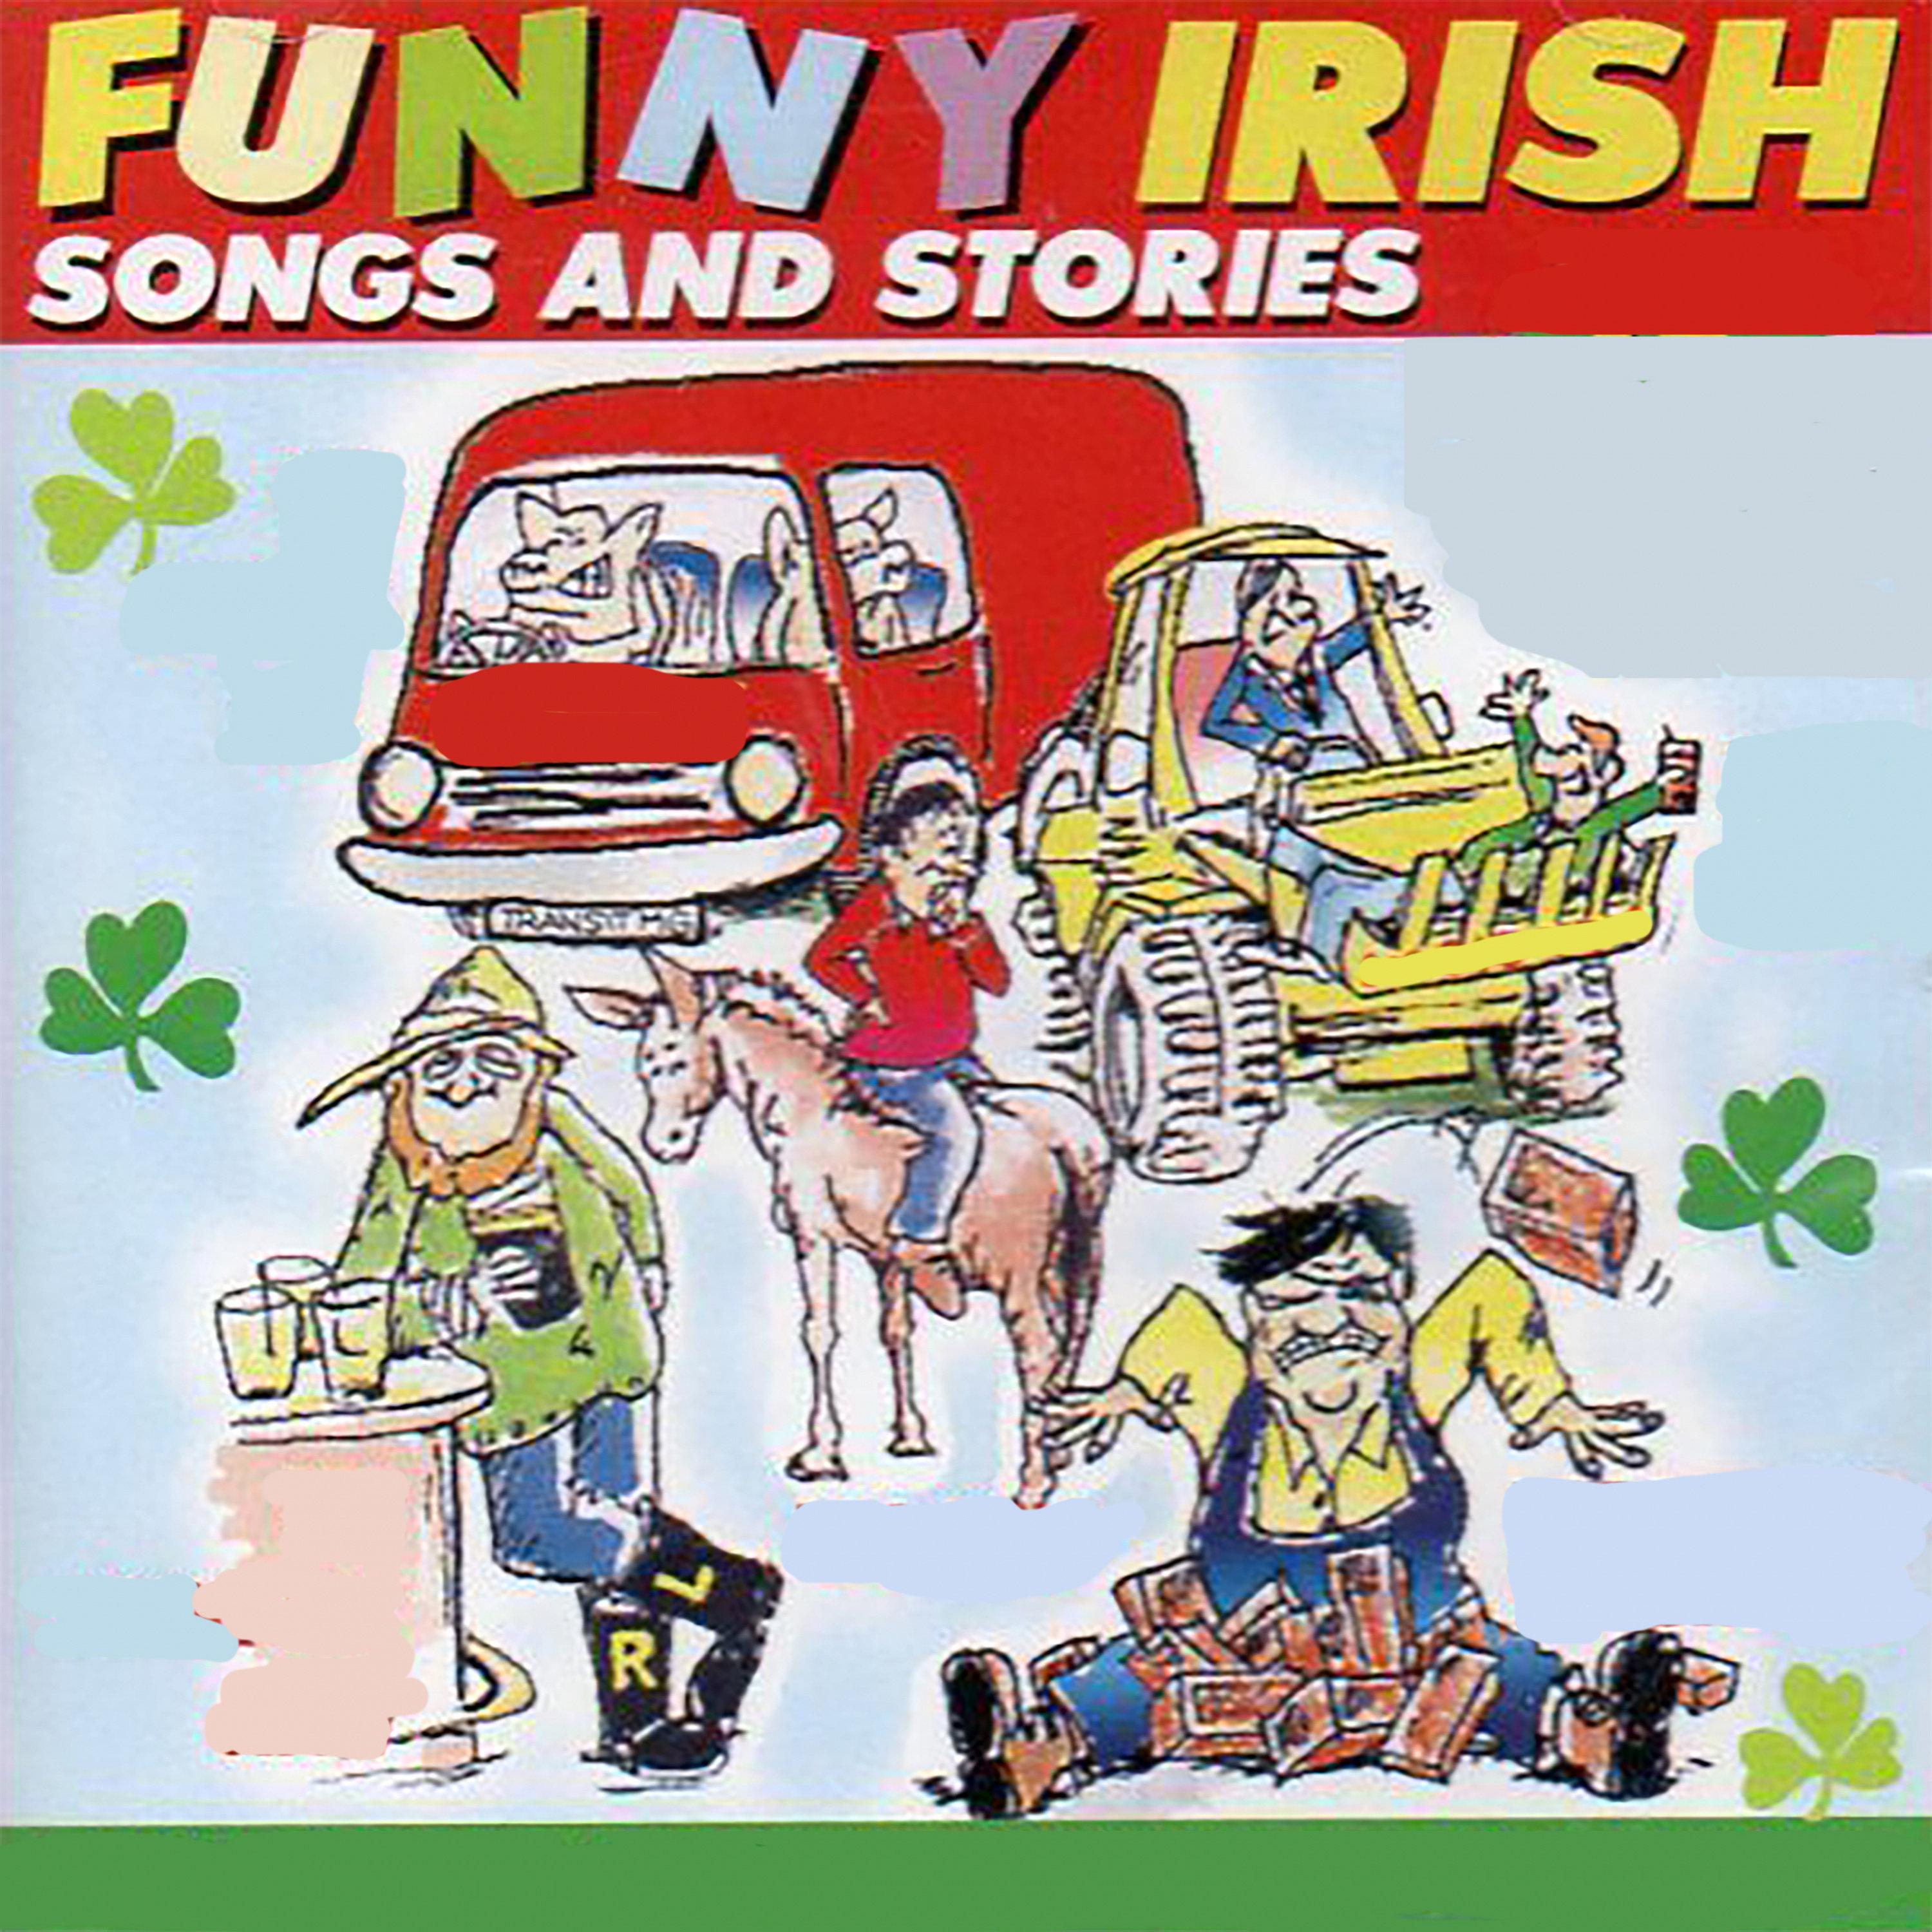 Funny Irish Songs And Stories